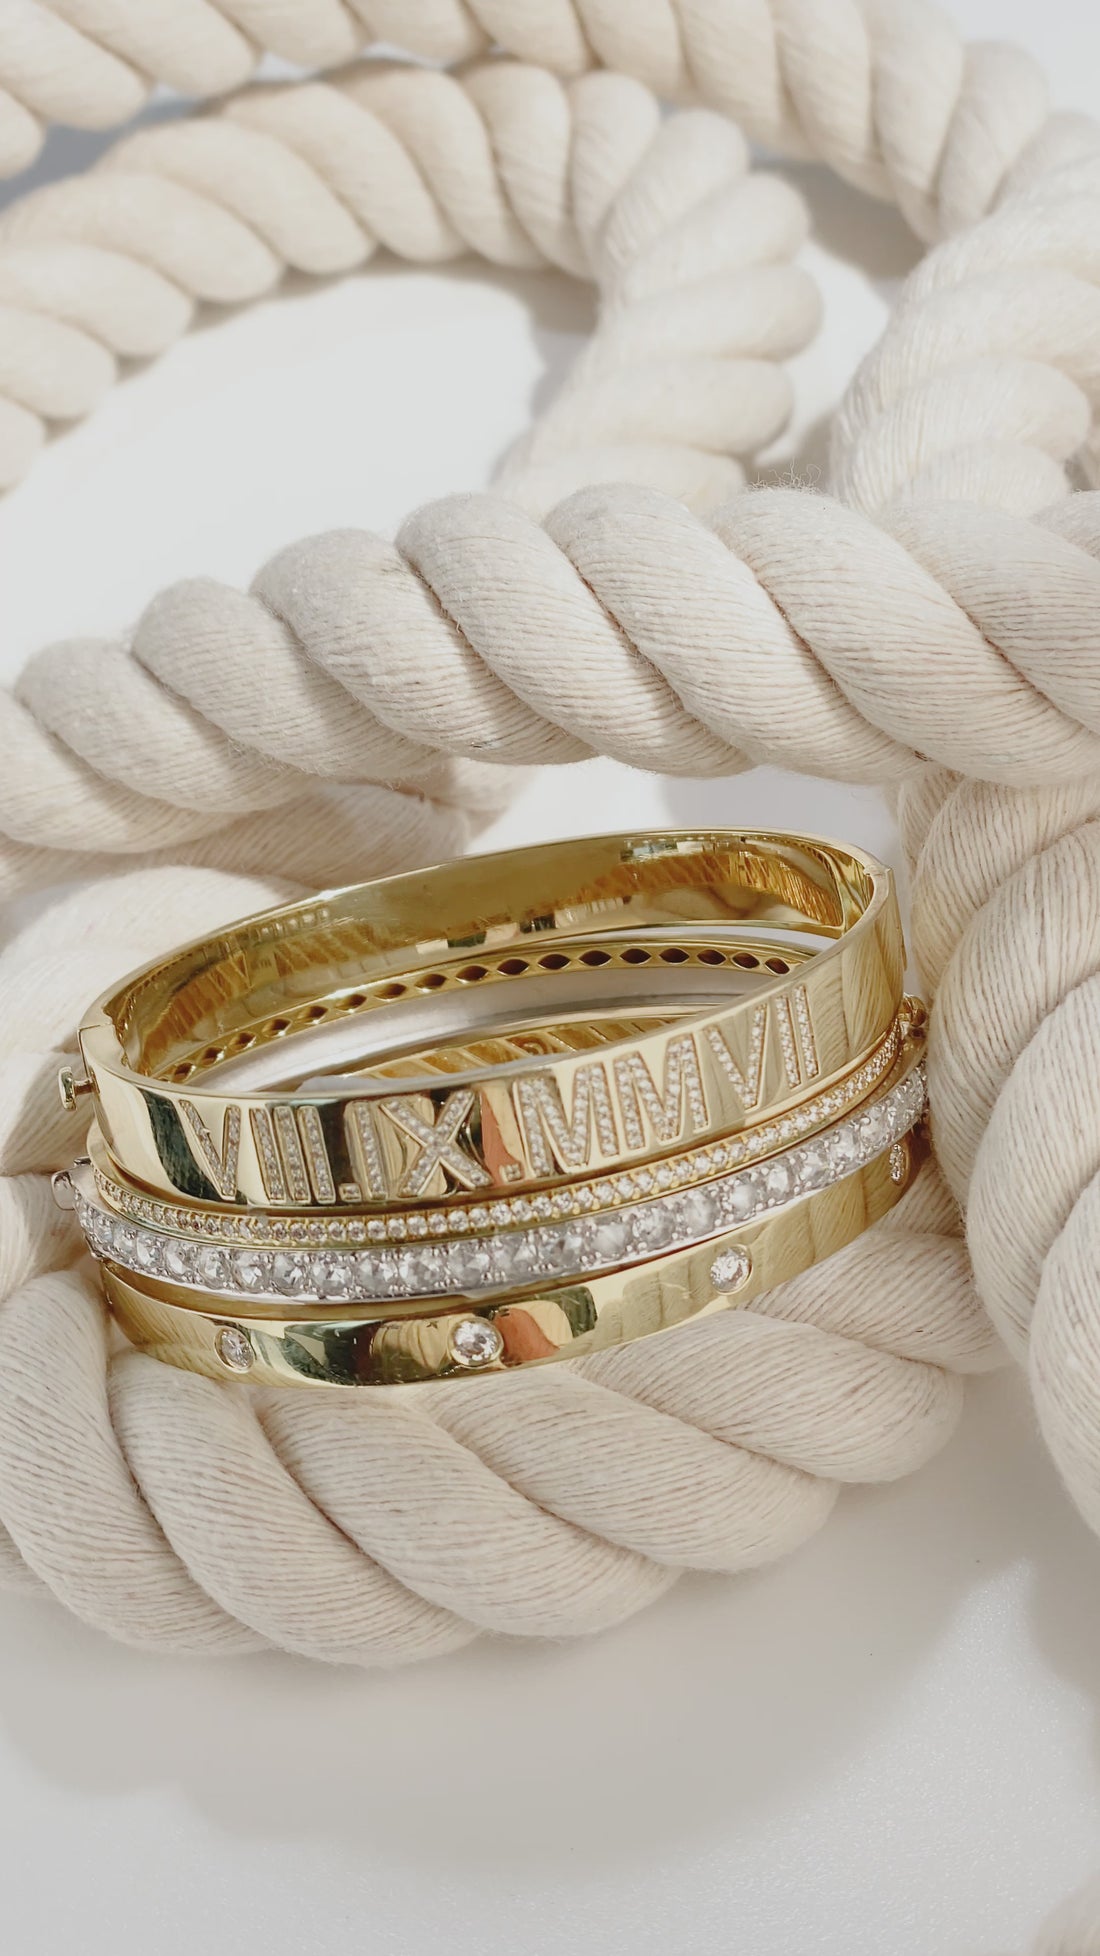 ILA SODHANI bangle stack shown on a coil of rope in front of a white background; from top to bottom: Celebration Bangle with natural diamonds in yellow gold, Aira bangle with natural diamonds in yellow gold, Winn Bangle with natural diamonds in white gold, Drake Bangle with natural diamonds in yellow gold.